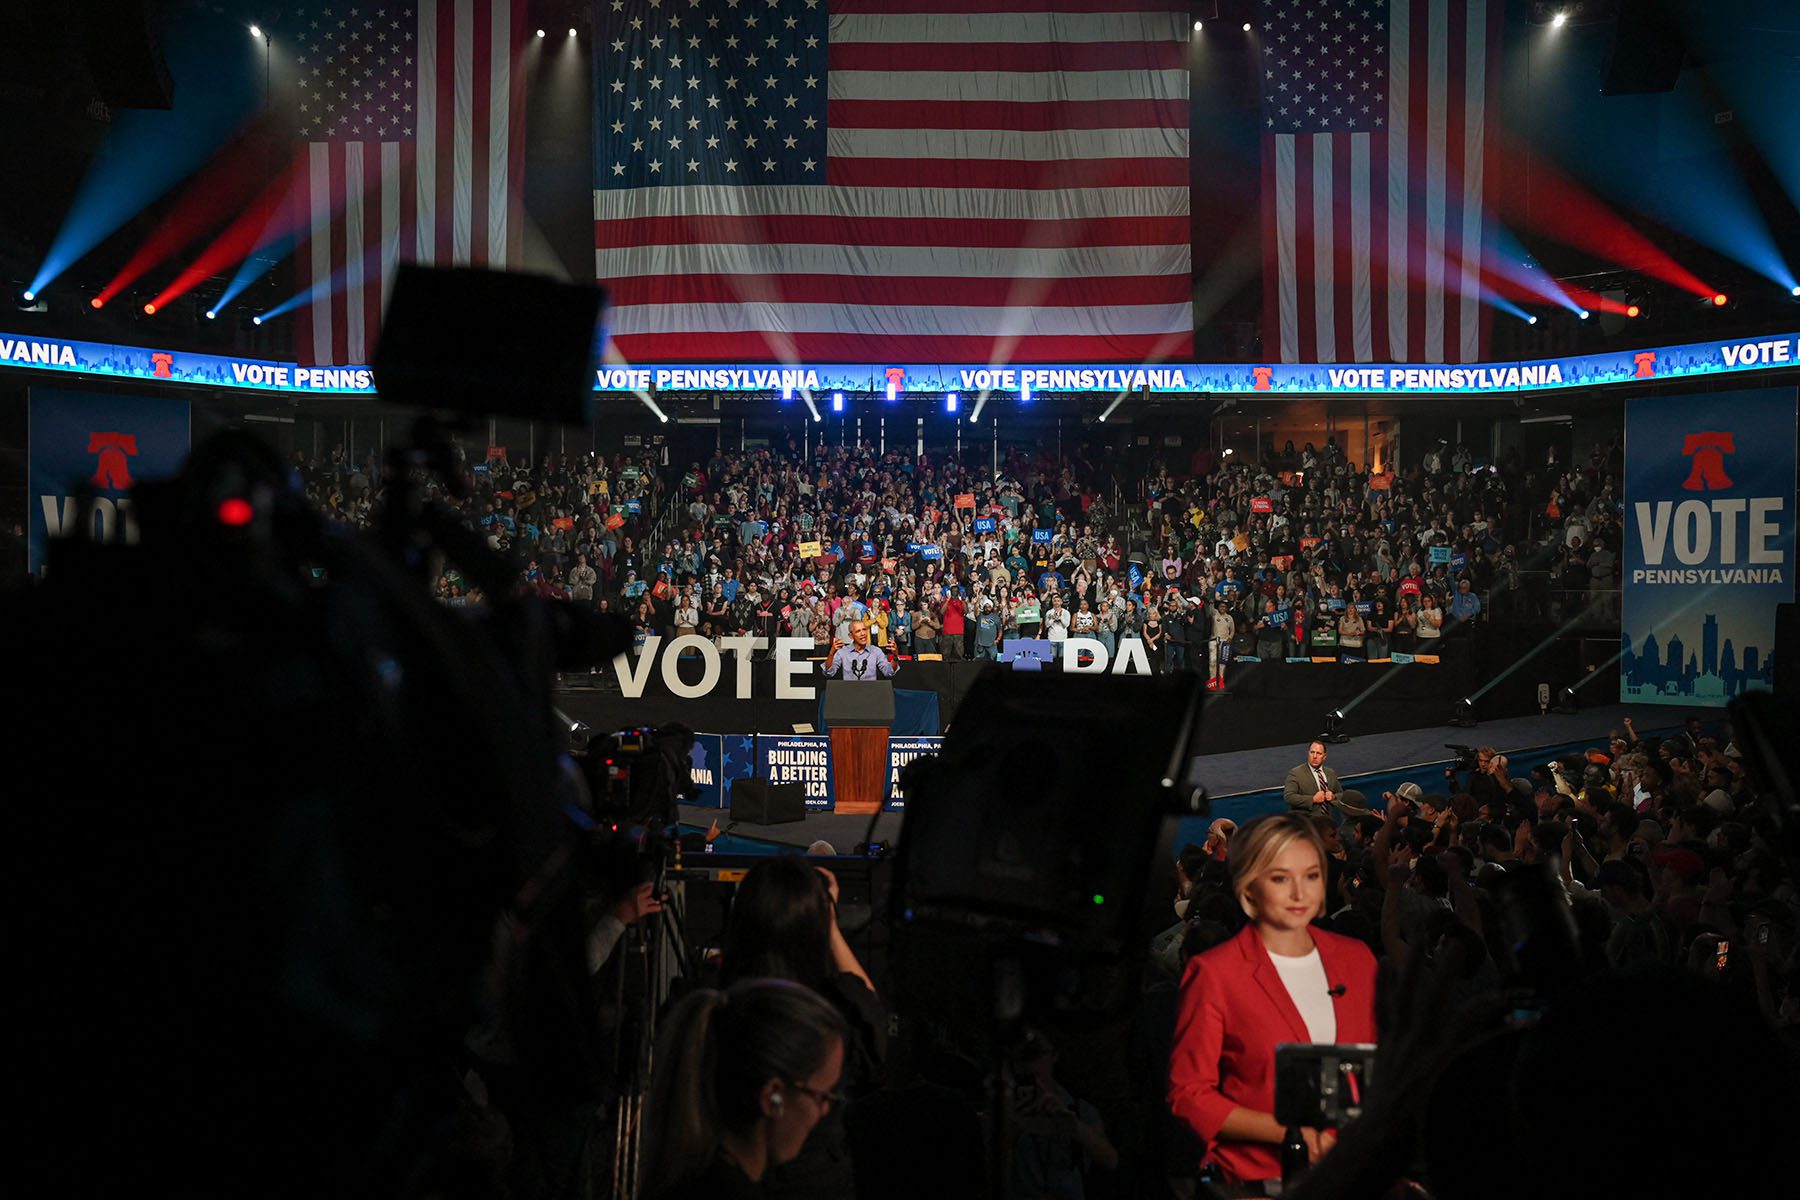 Former President Barack Obama speaks during a rally in support of Senate candidate John Fetterman. In the foreground, media is recording the event. In the background, supporters cheer and chant.